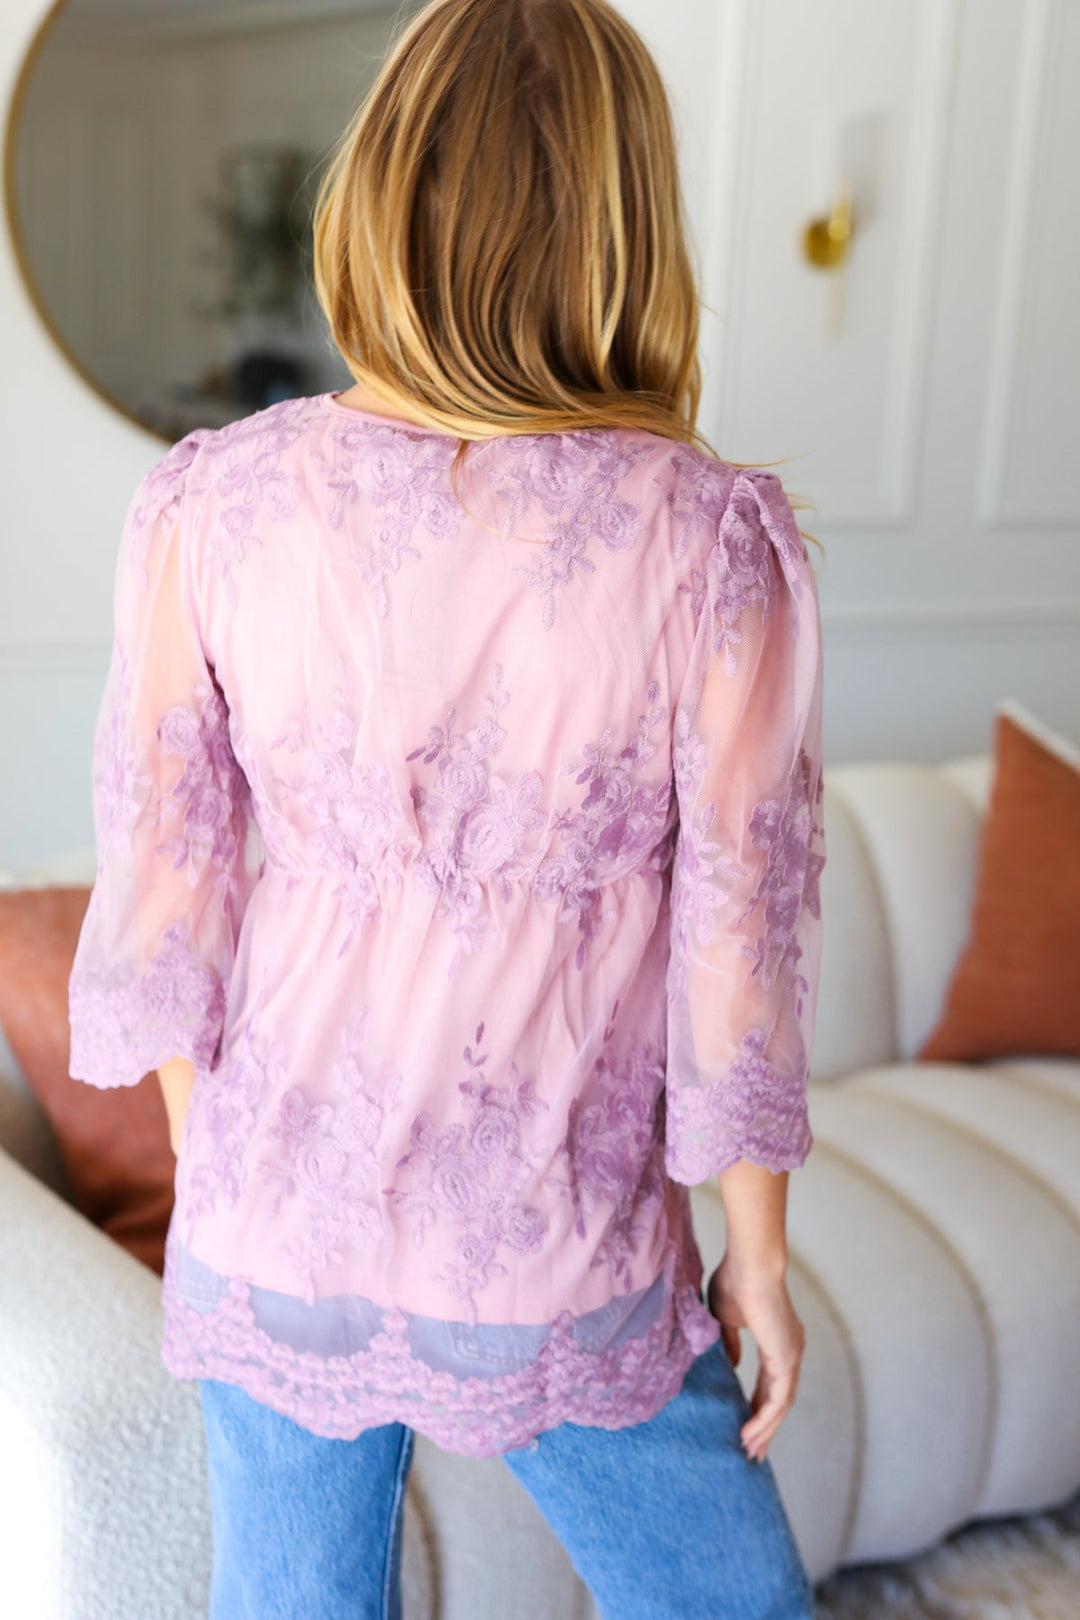 Keep You Close - Lace Embroidered Top